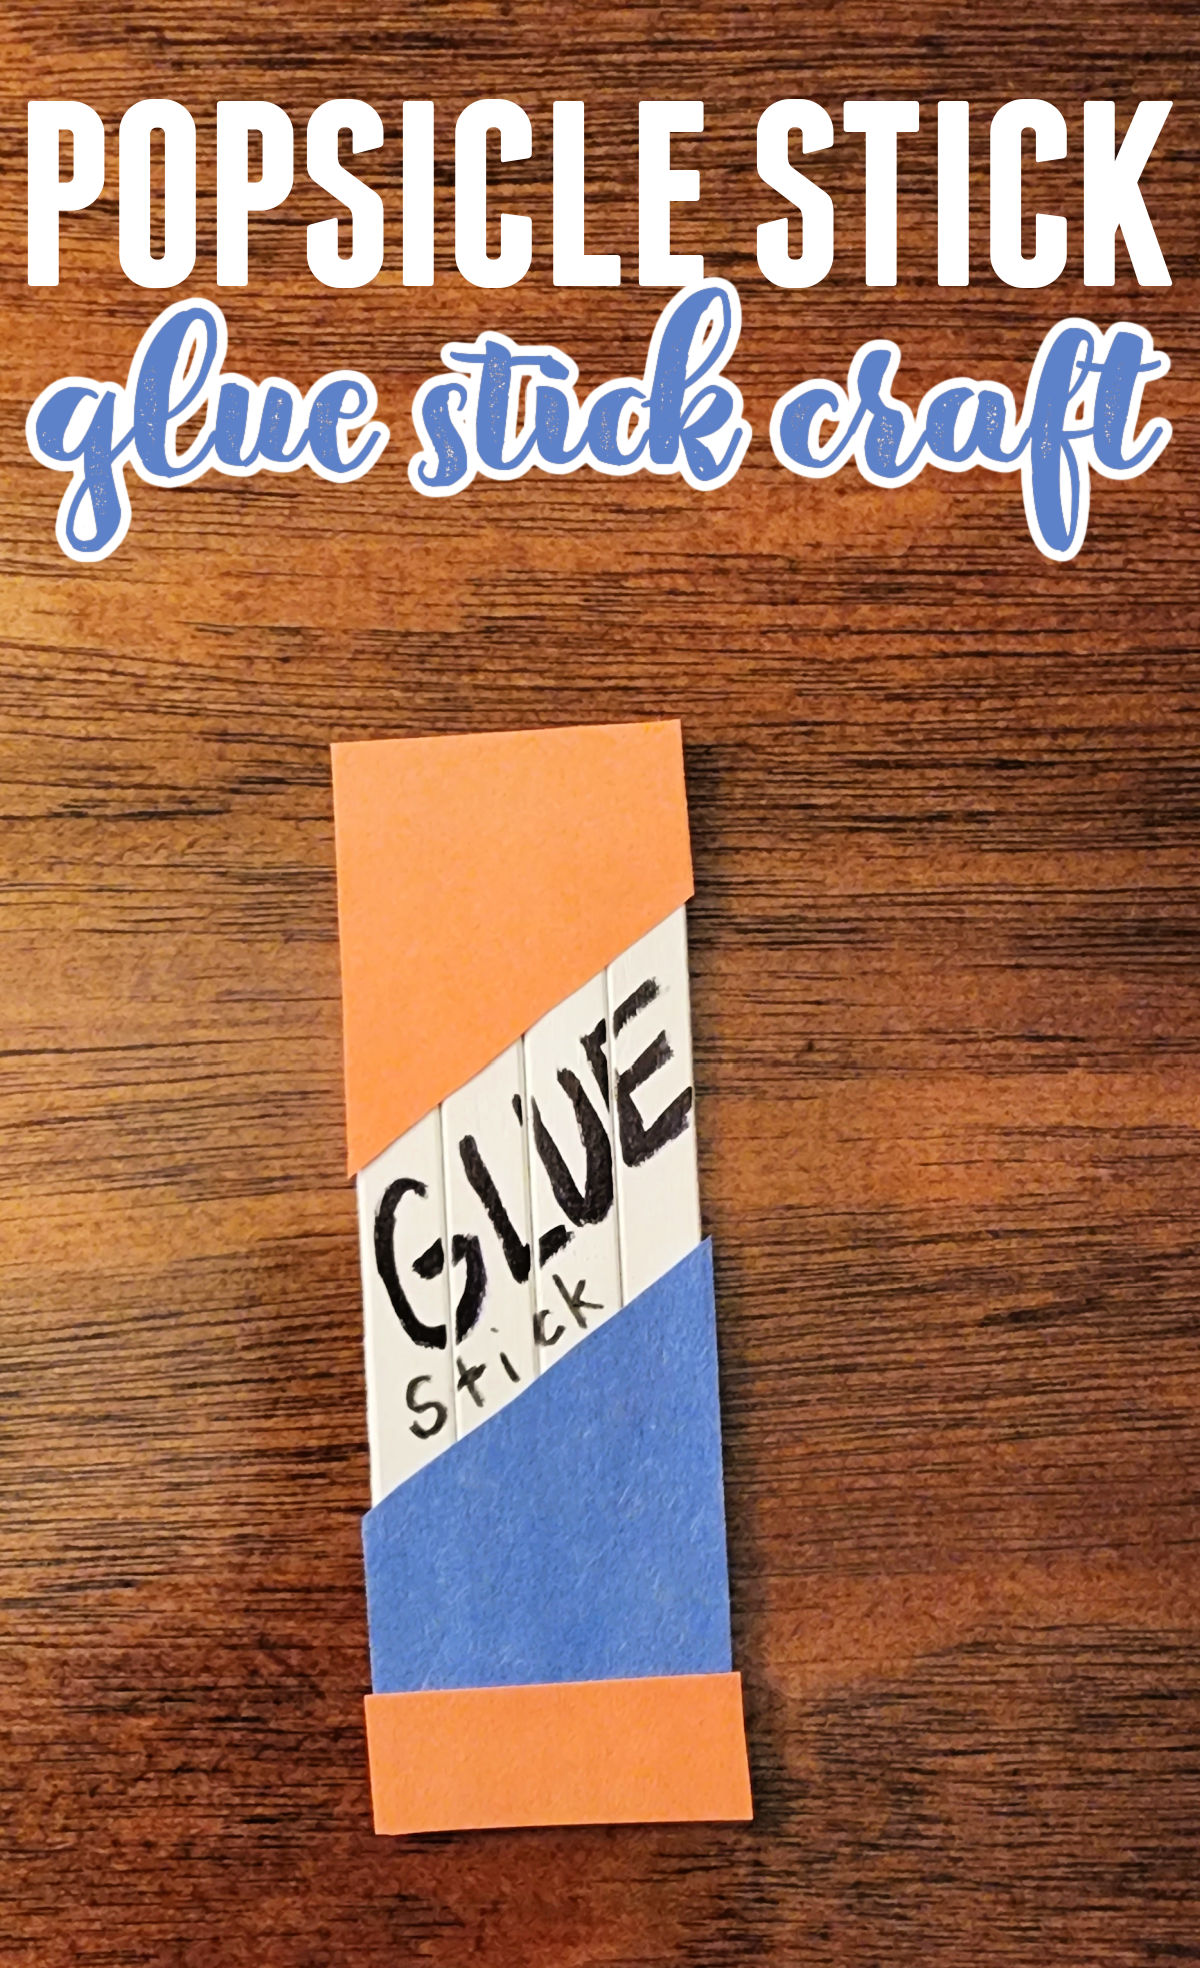 Back to school craft | Popsicle Stick glue stick craft made out of white popsicle sticks and construction paper.